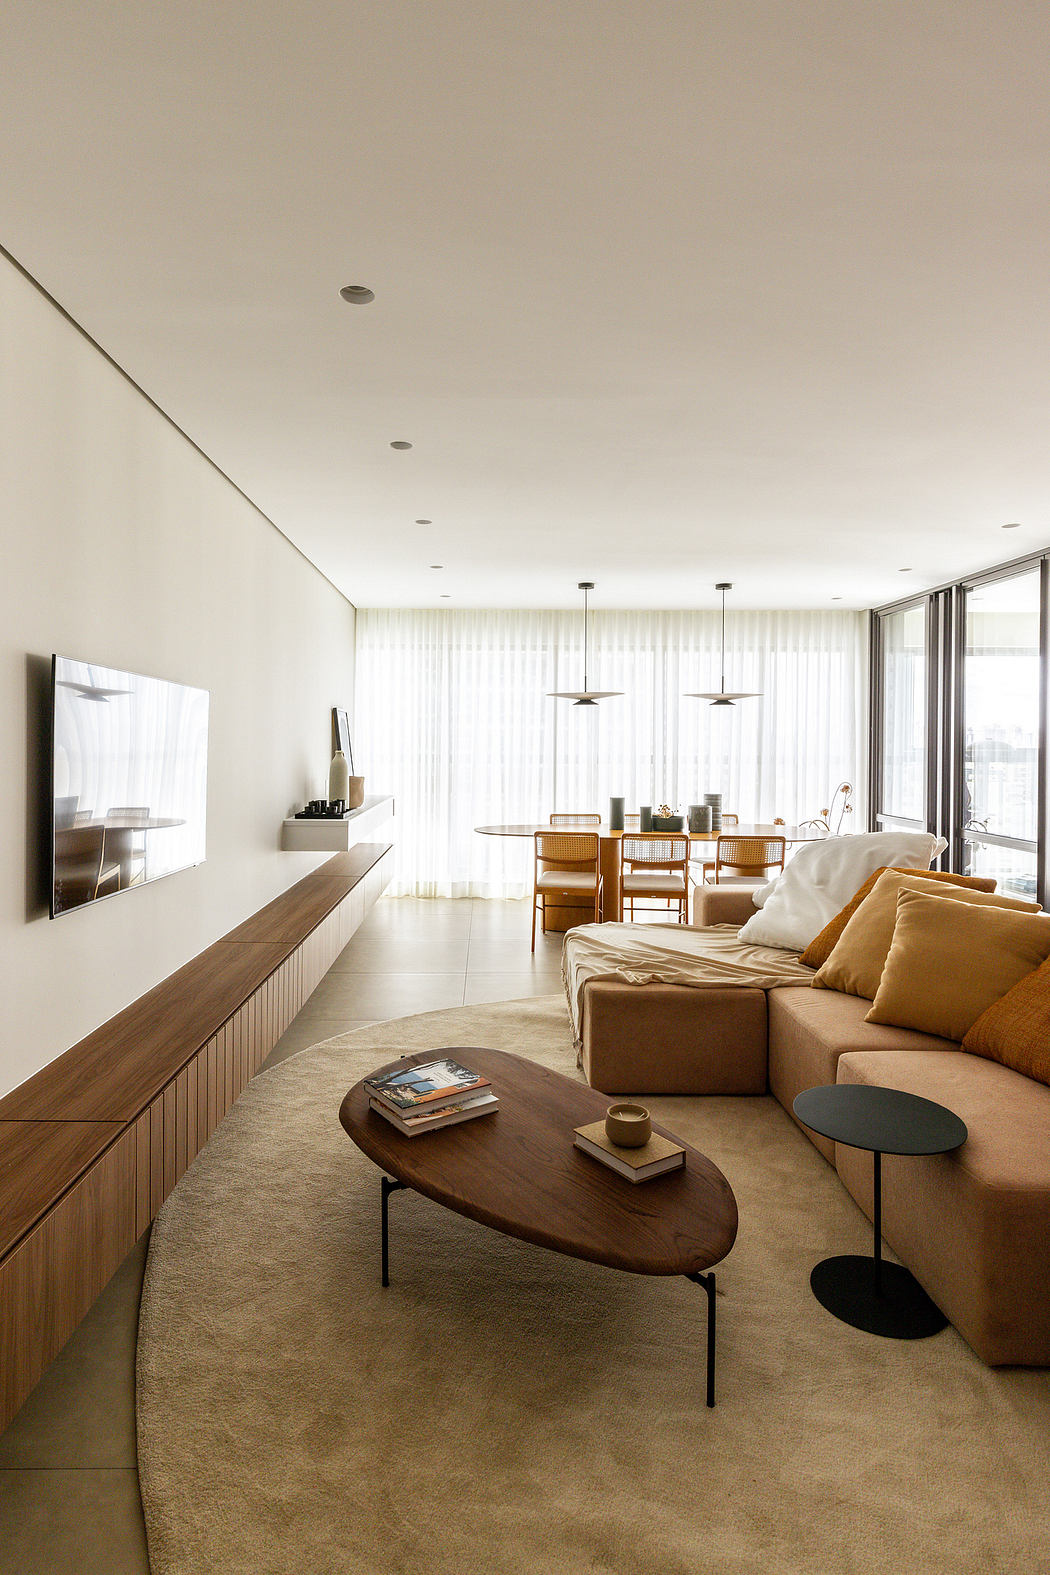 Minimalist living room with wood furniture, neutral tones, and large windows providing ample natural light.